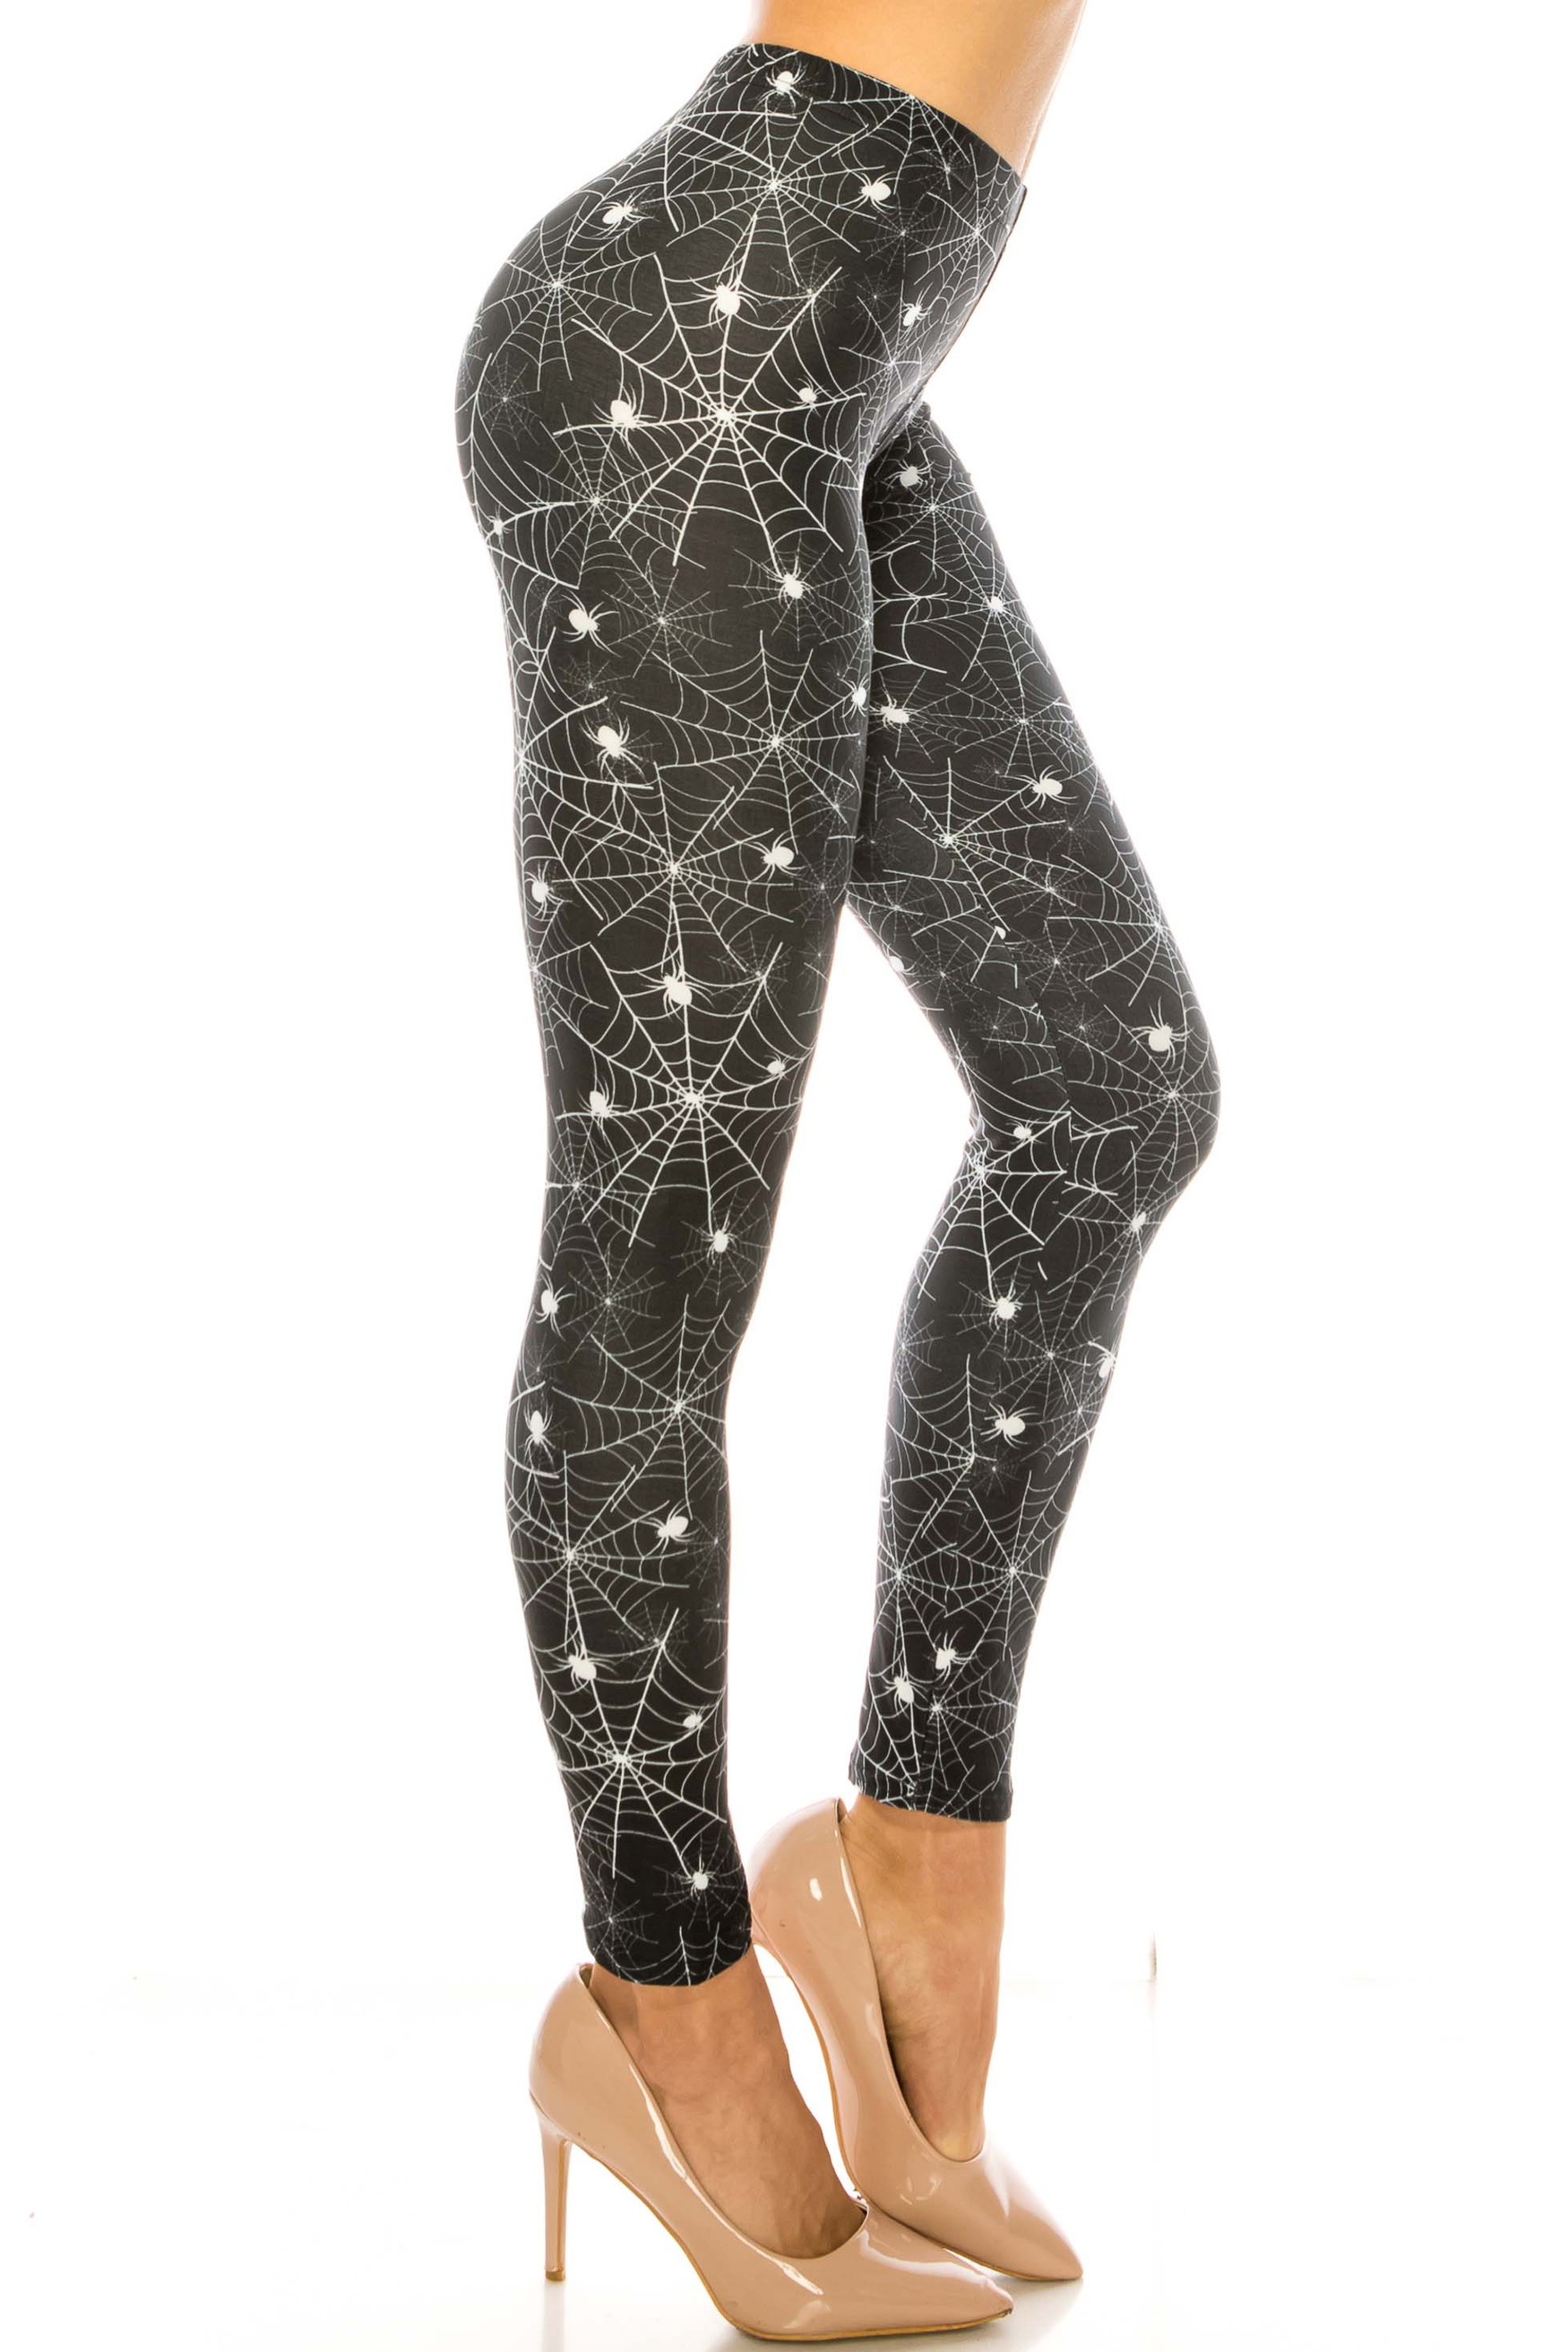 Creamy Soft Spiders and Spiderwebs Kids Leggings - USA Fashion™